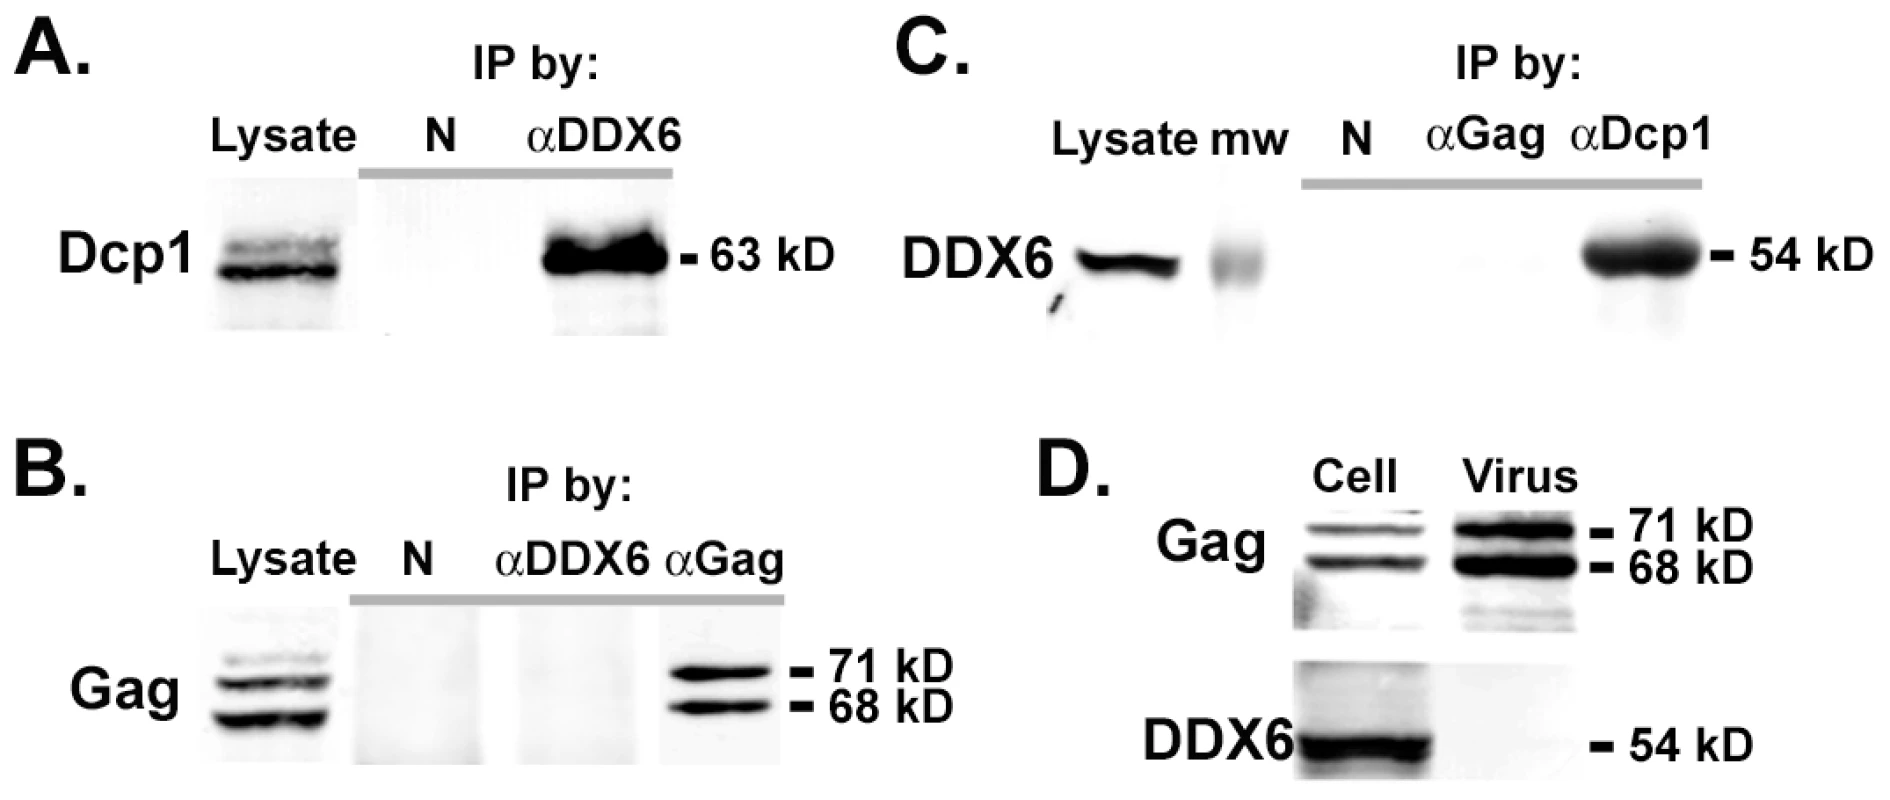 Co-immunoprecipitation of DDX6 with Dcp1 but not with Gag.